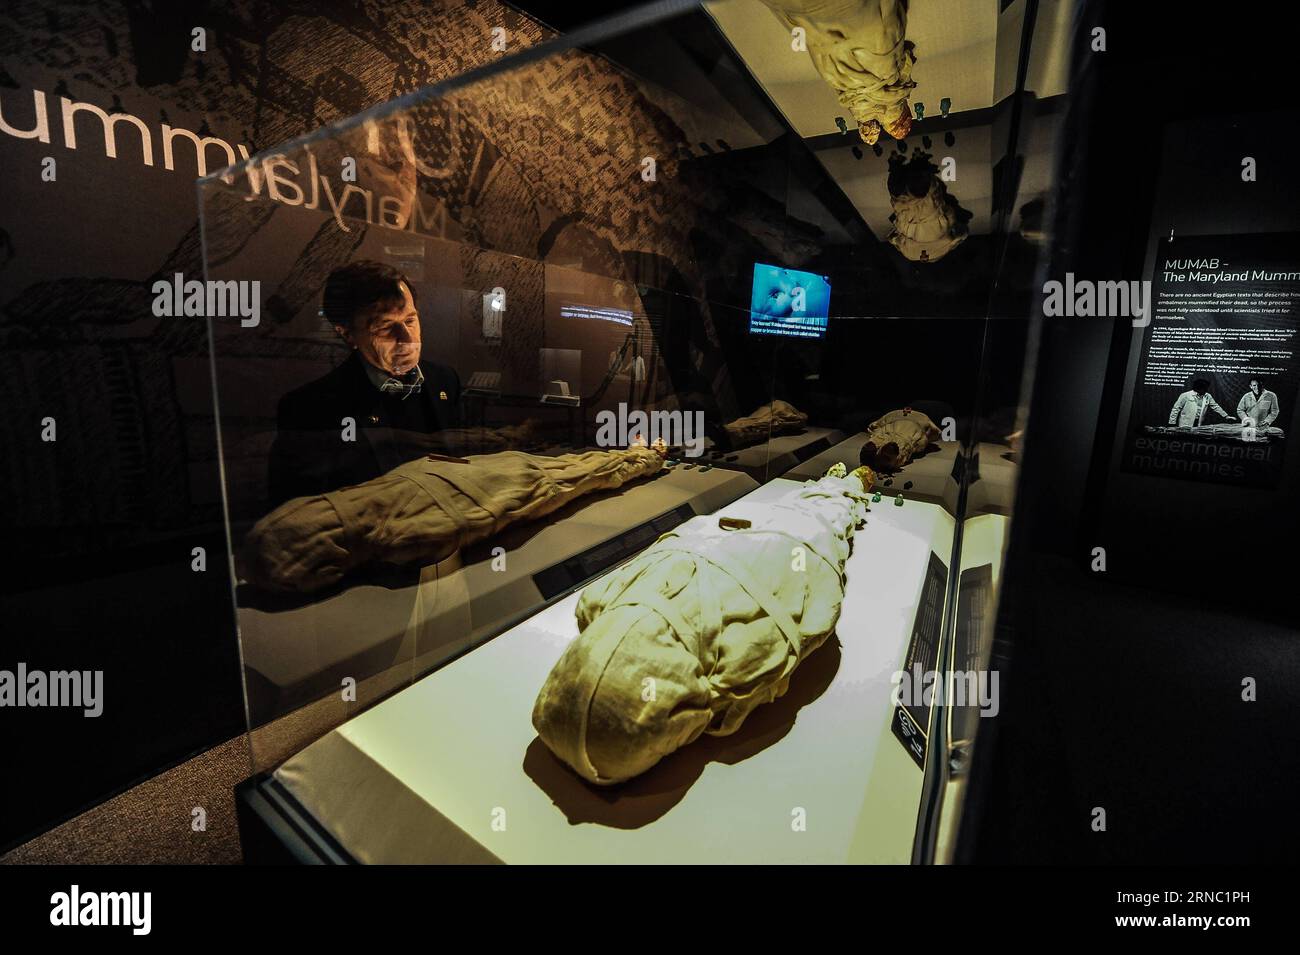 https://c8.alamy.com/comp/2RNC1PH/mumien-ausstellung-in-santa-ana-160318-los-anglels-march-18-2016-professor-ronn-wade-of-university-of-maryland-introduces-a-mummy-made-in-the-1990s-during-the-preview-of-the-mummies-of-the-world-the-exhibition-held-at-the-bowers-museum-california-the-united-states-march-17-2016-the-exhibition-featuring-more-than-150-artifacts-real-human-and-animal-mummies-from-across-the-globe-will-kick-off-on-march-18-lyi-us-california-mummies-exhibition-zhangxchaoqun-publicationxnotxinxchn-mummies-exhibition-in-santa-ana-los-march-18-2016-professor-ronn-calf-of-university-of-mar-2RNC1PH.jpg